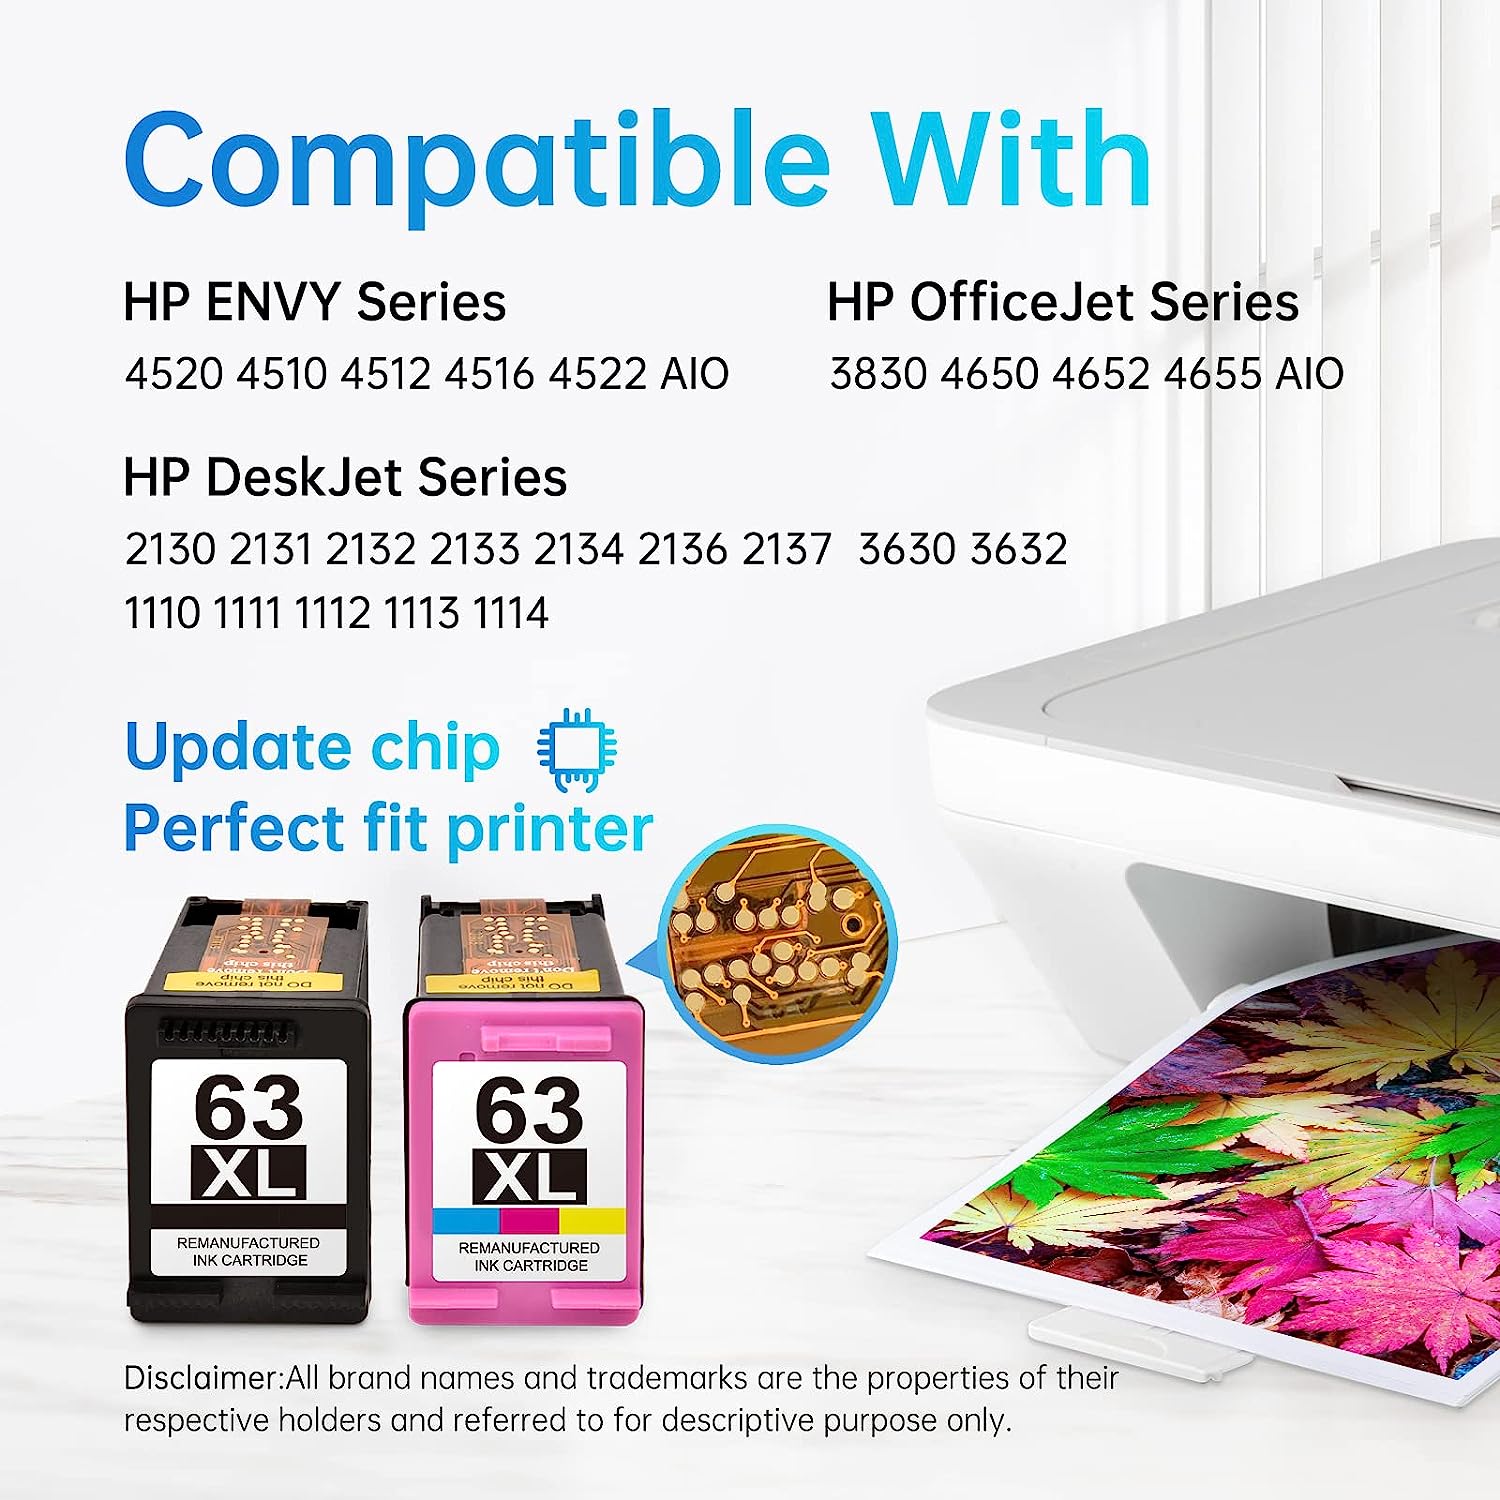 Printer Compatibility for HP 63XL Ink Cartridges:Detailed compatibility list for HP 63XL ink cartridges featuring a wide range of HP ENVY, OfficeJet, and DeskJet series printers, emphasizing the updated chip for perfect printer fit.